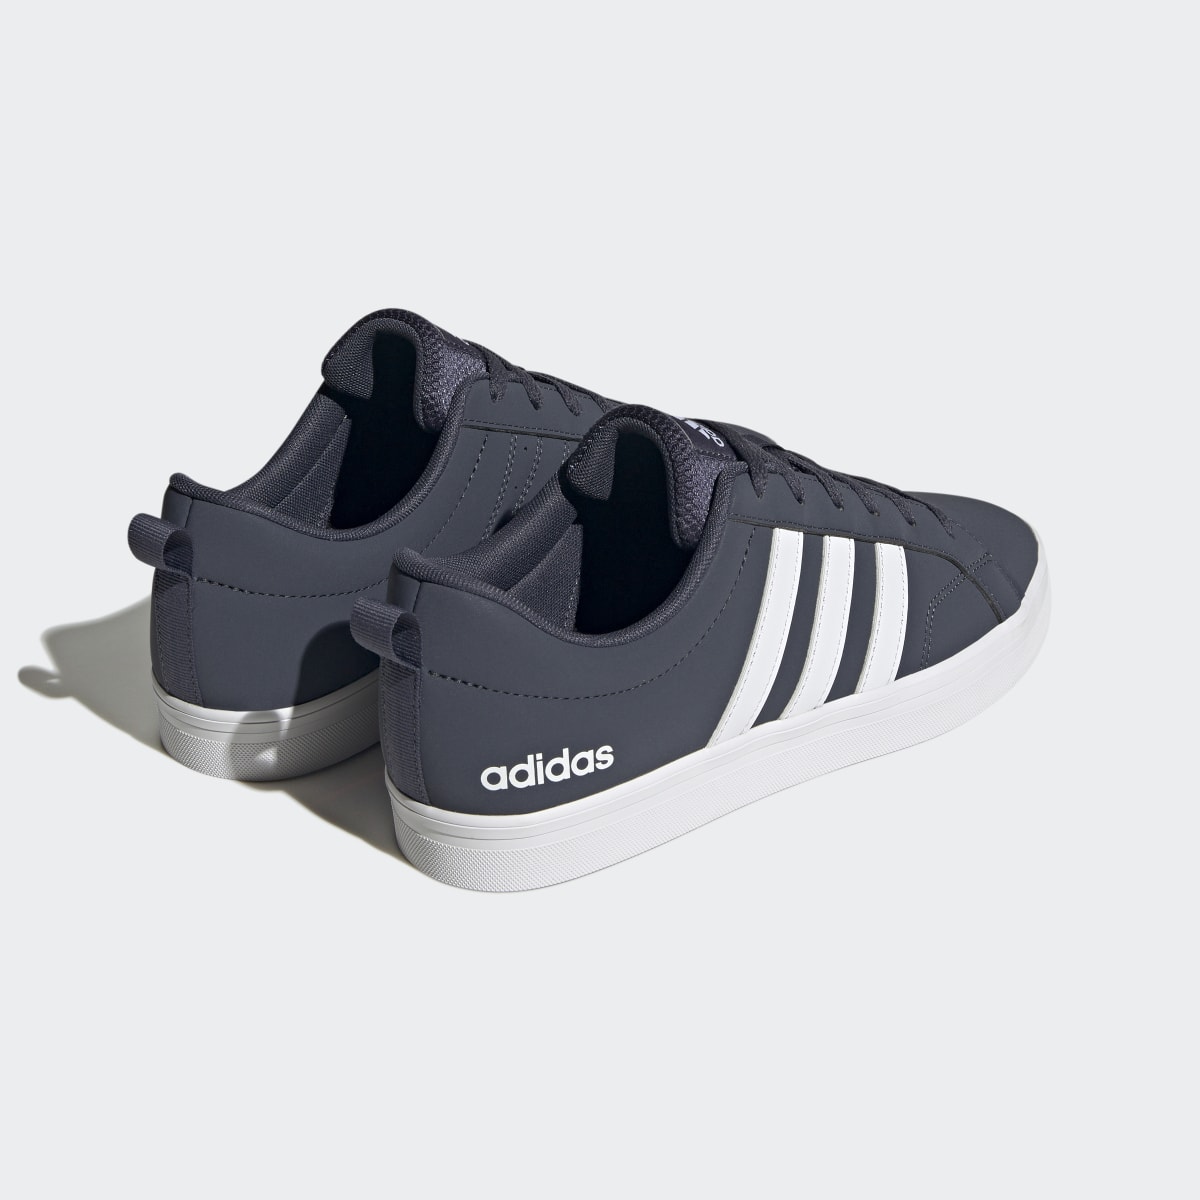 Adidas Chaussure VS Pace 2.0. 6